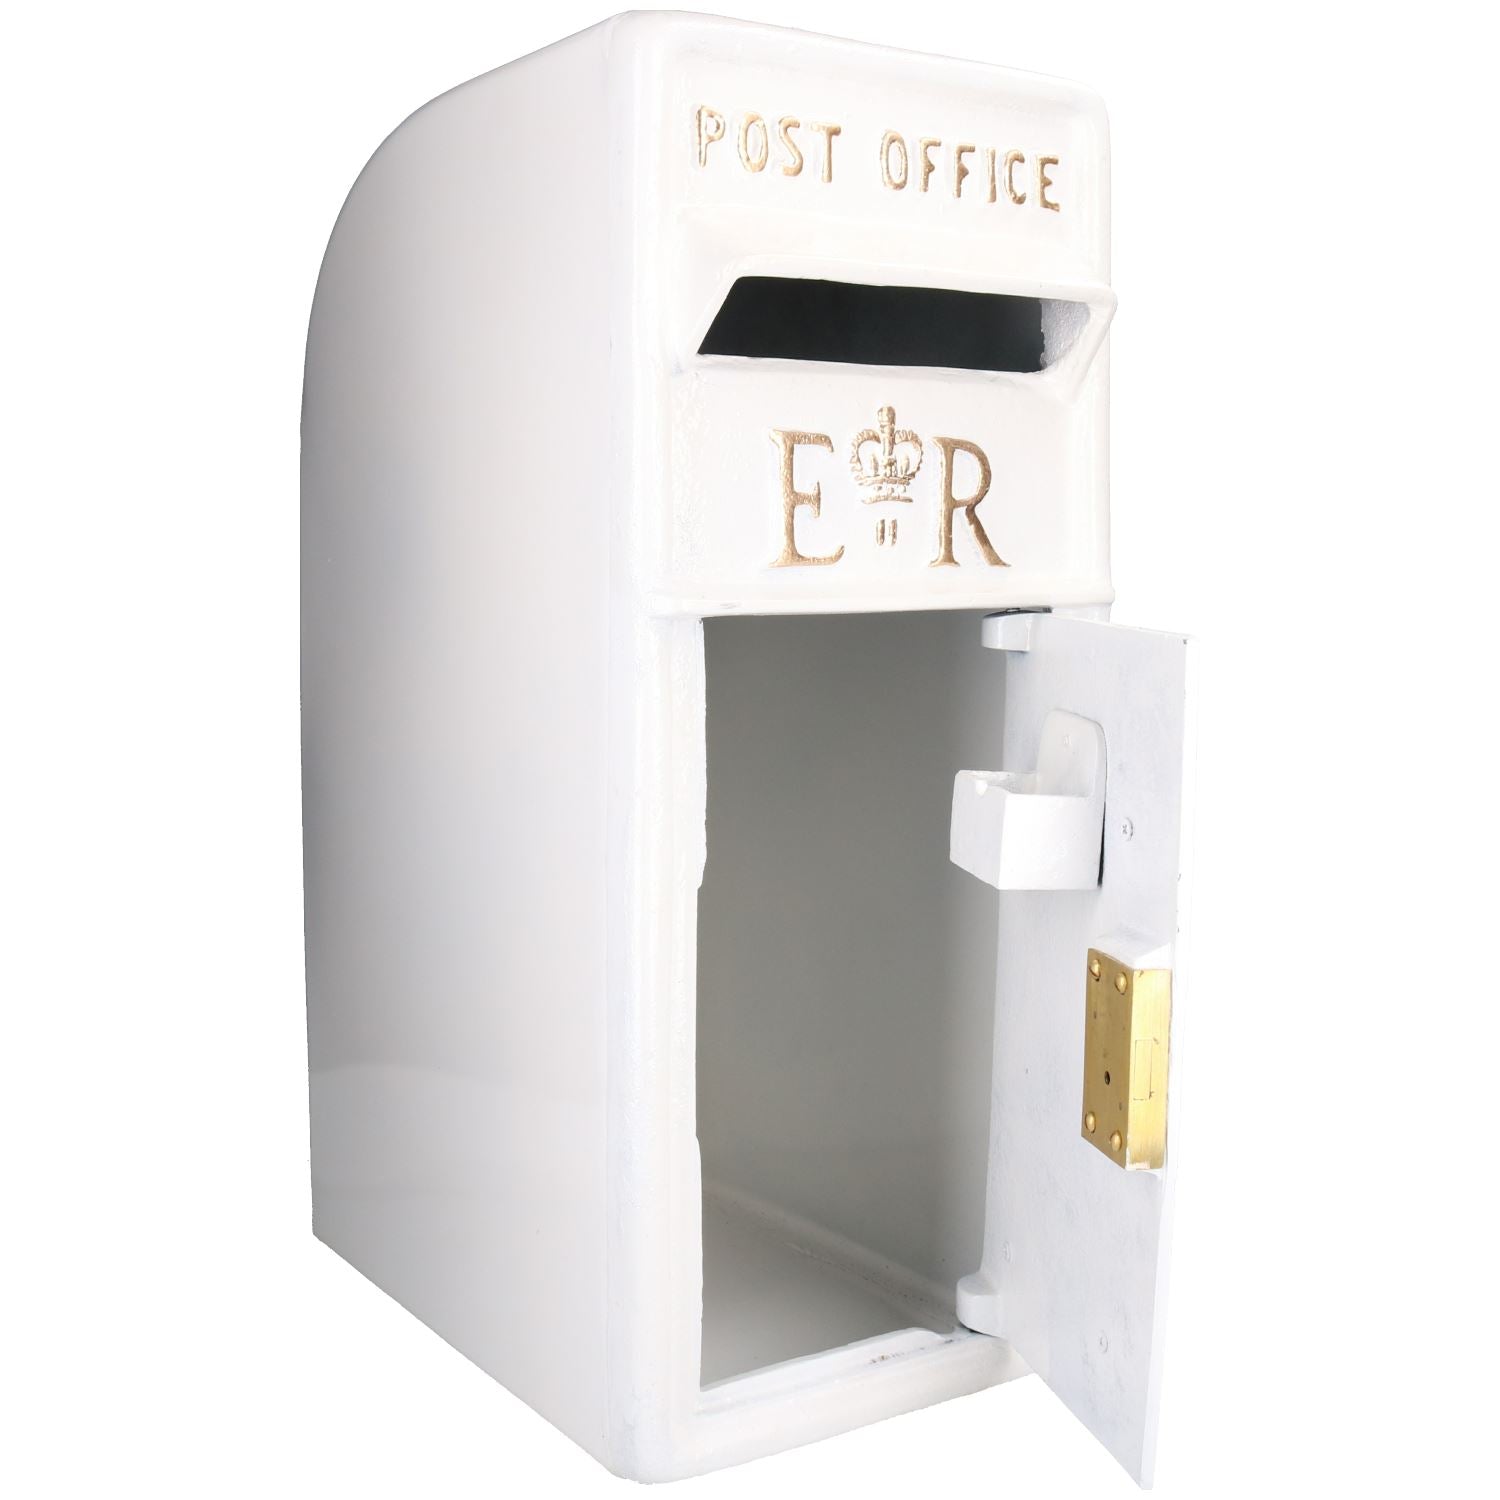 White ER Royal Mail Post Mail Letter Box Replica Cast Iron Post Office Lockable